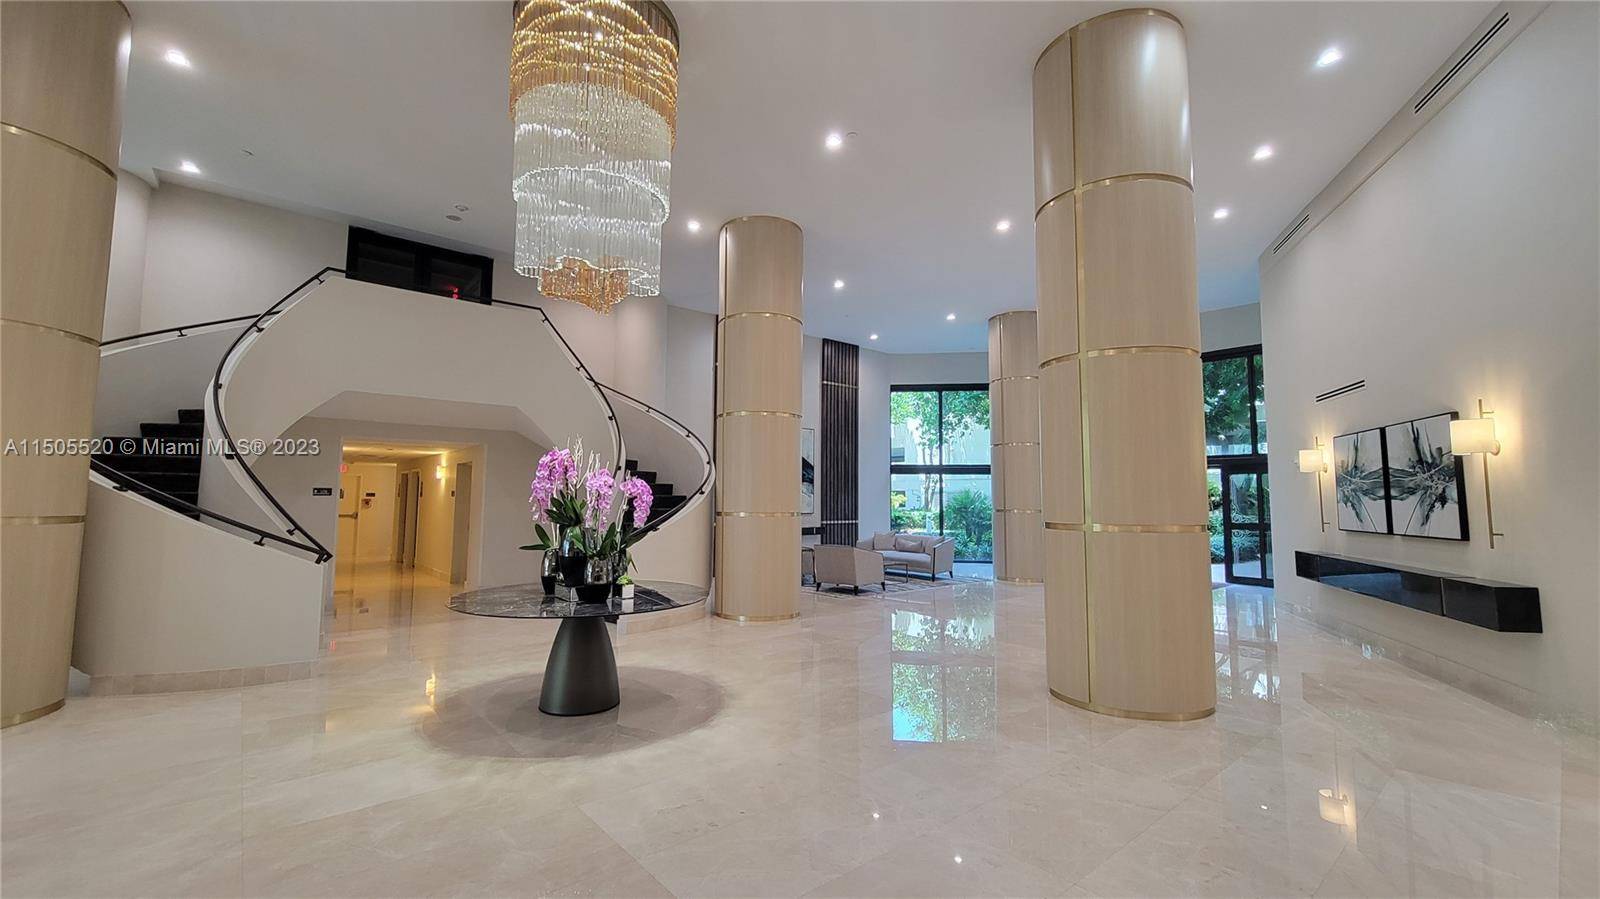 Inside a private community in Aventura this unit is located in an impeccable gated neighborhood with a tropical resort feeling.